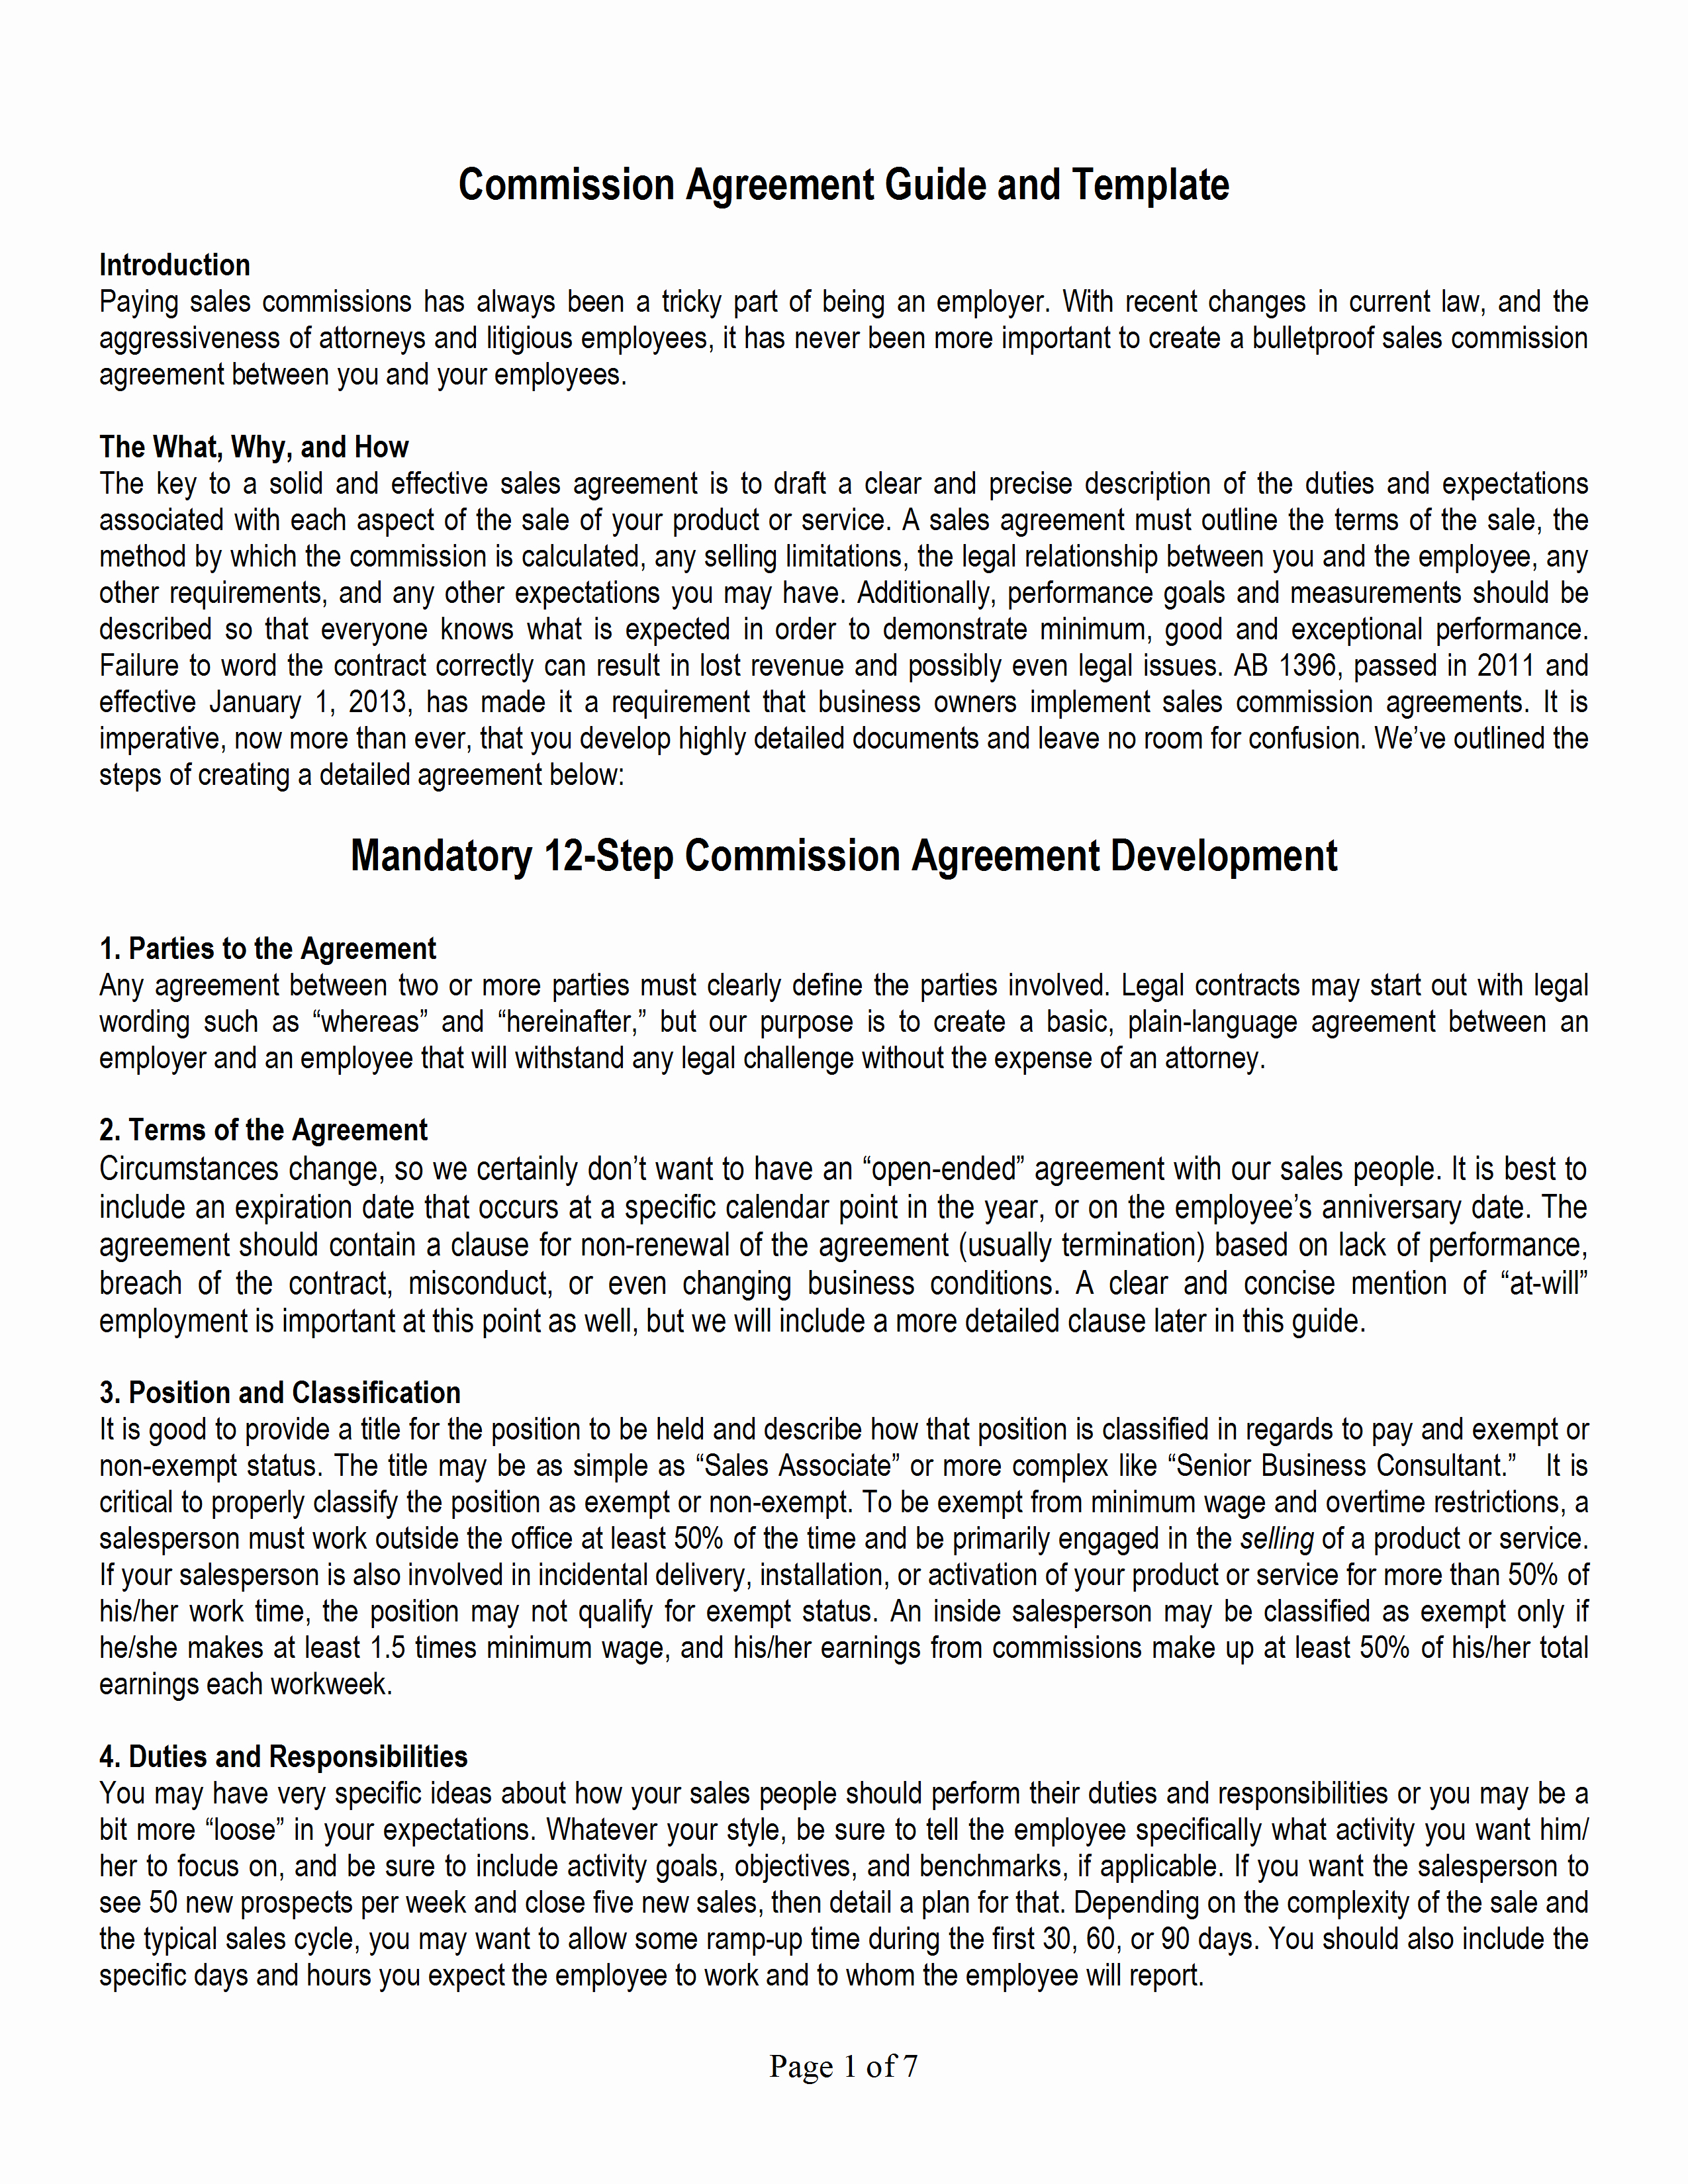 Commission Sales Agreement Template Beautiful Mission Agreement Templates